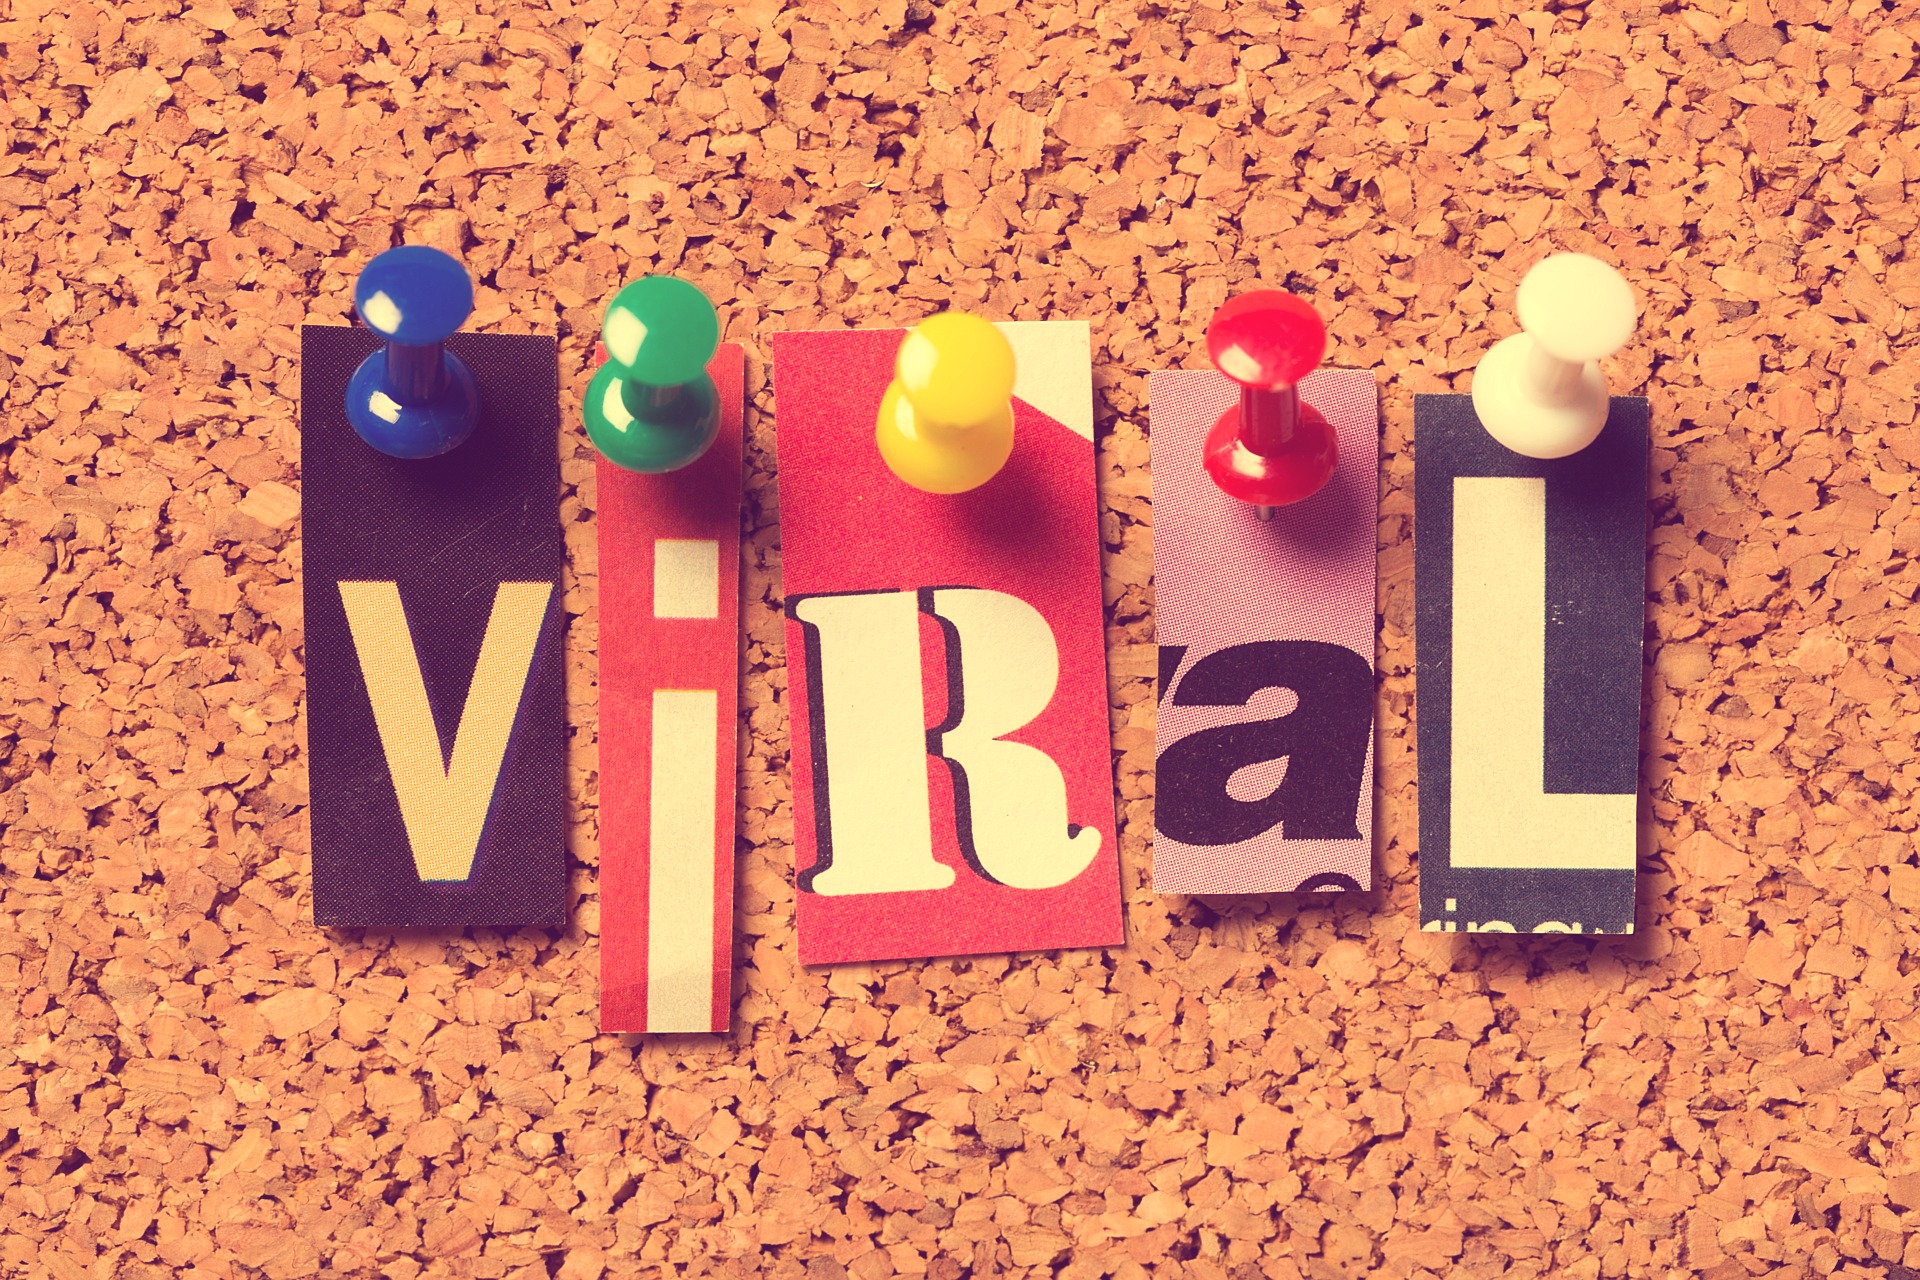 Viral Marketing Success Depends on Influence Networks